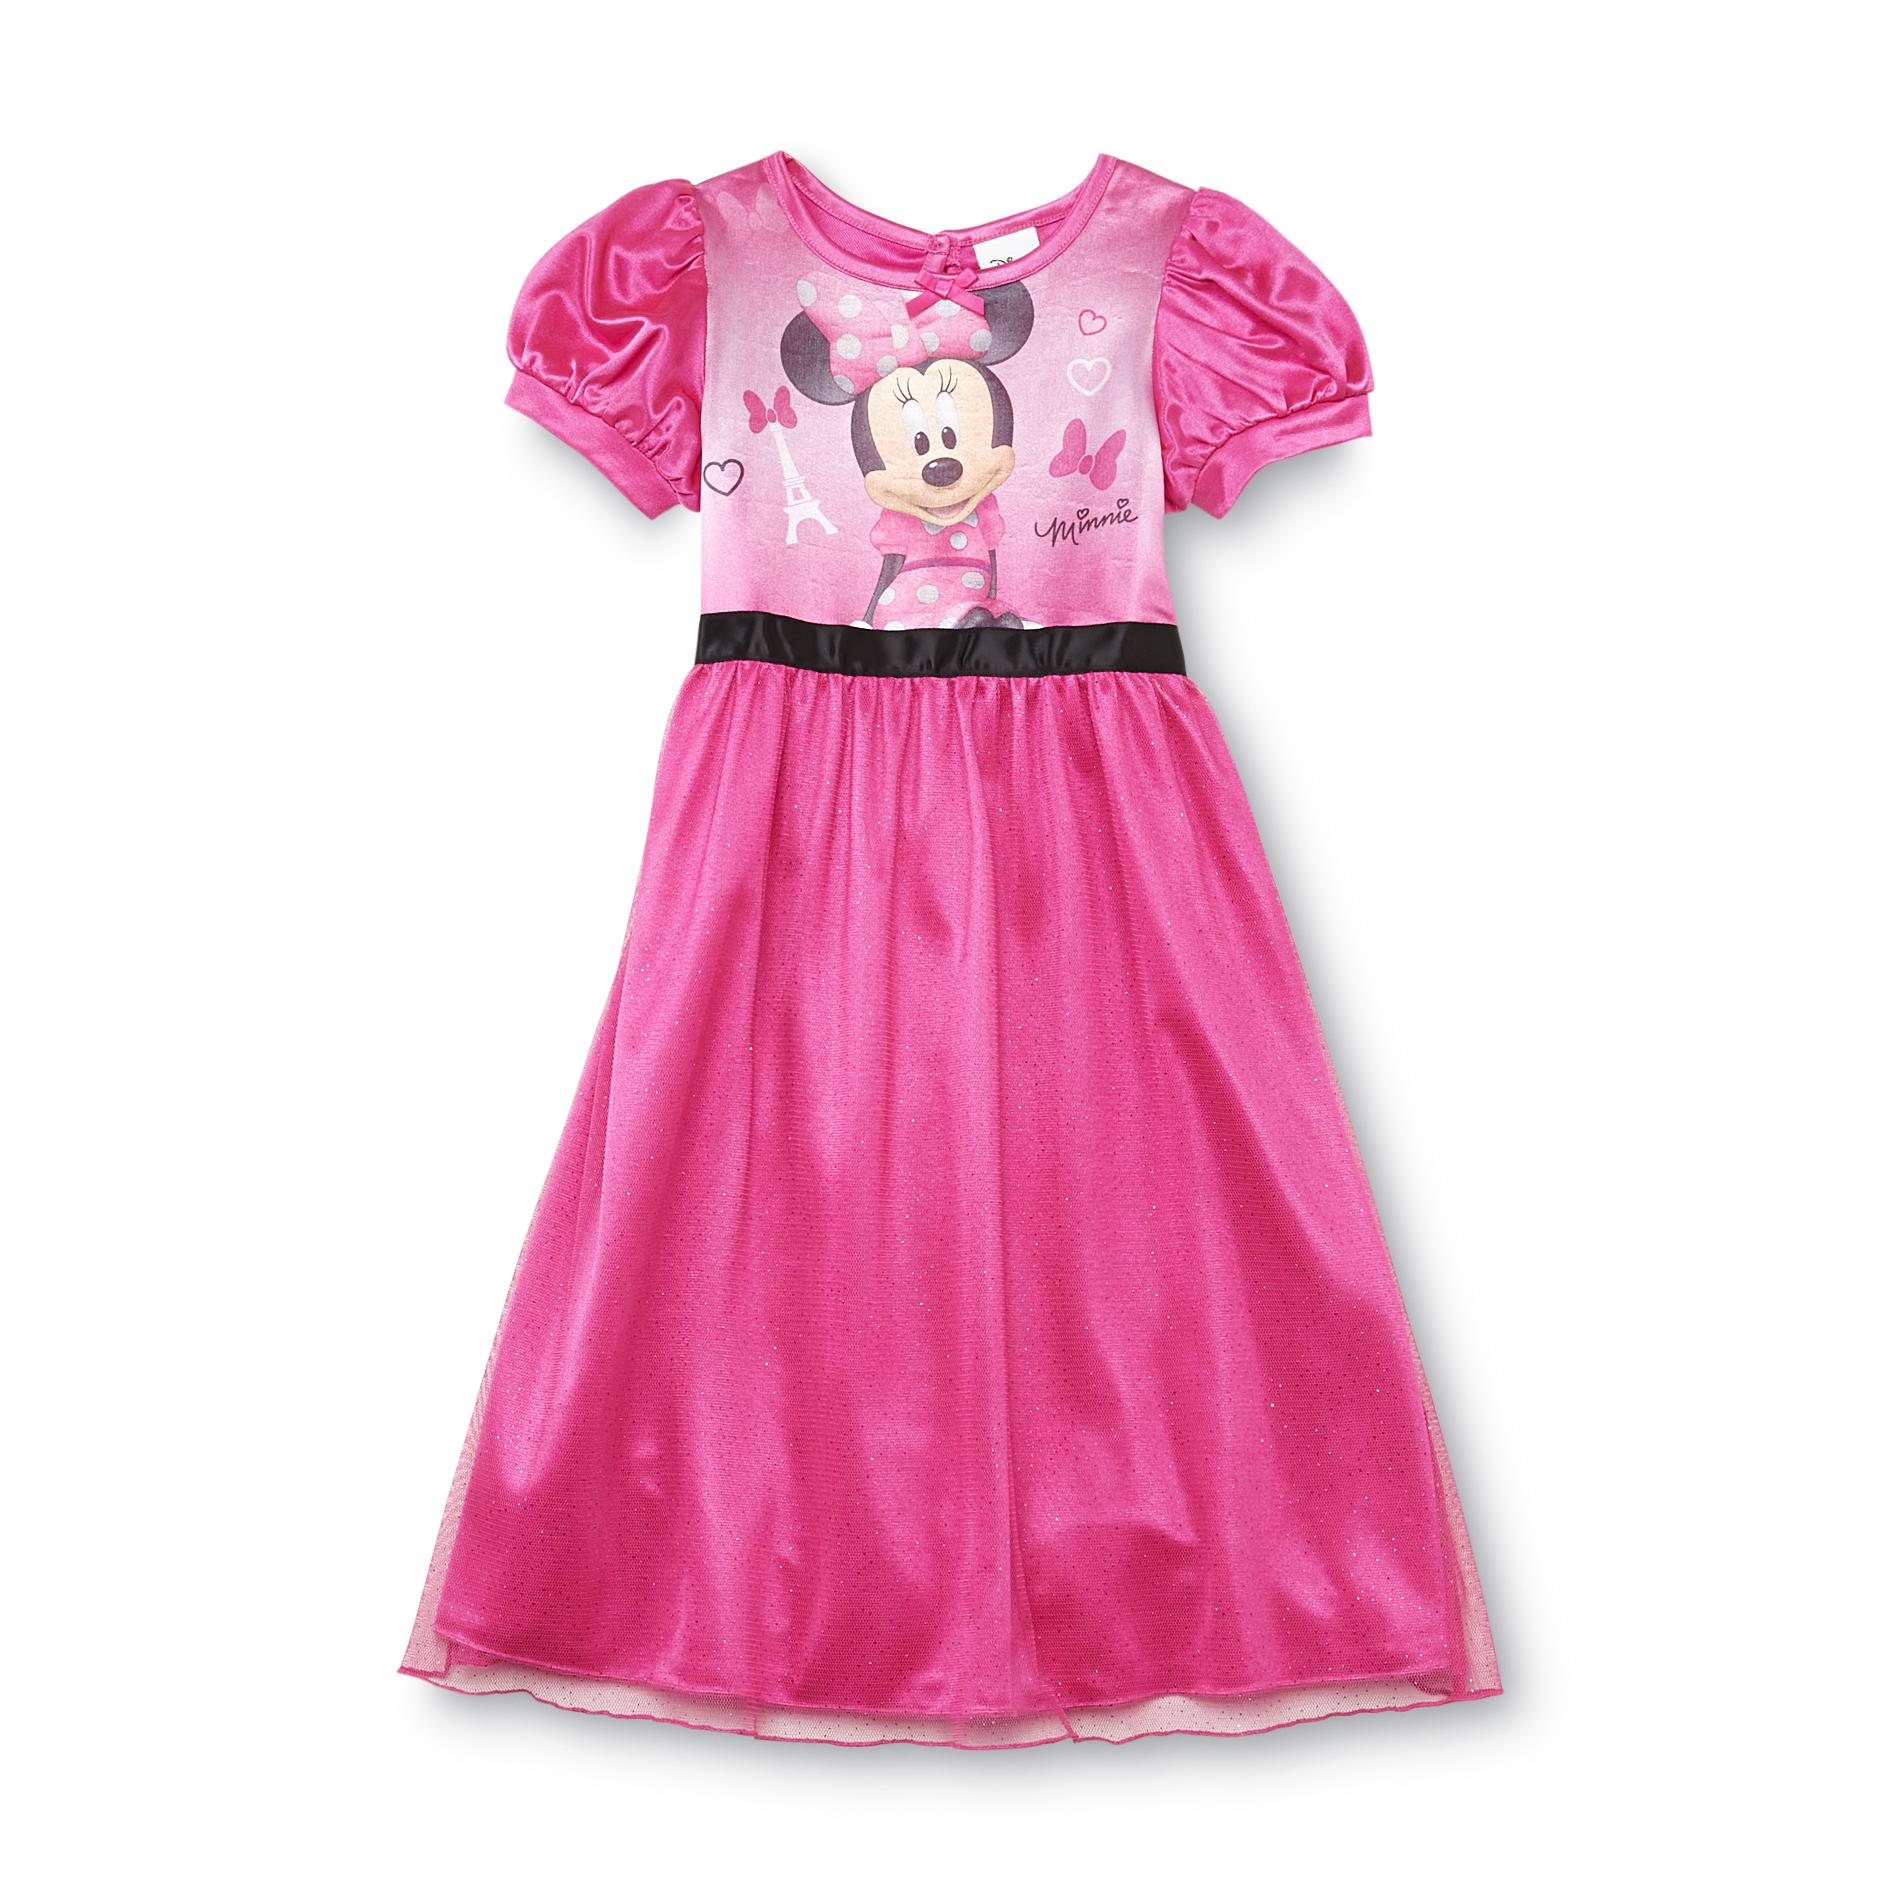 Disney Toddler Girl's Nightgown - Minnie Mouse